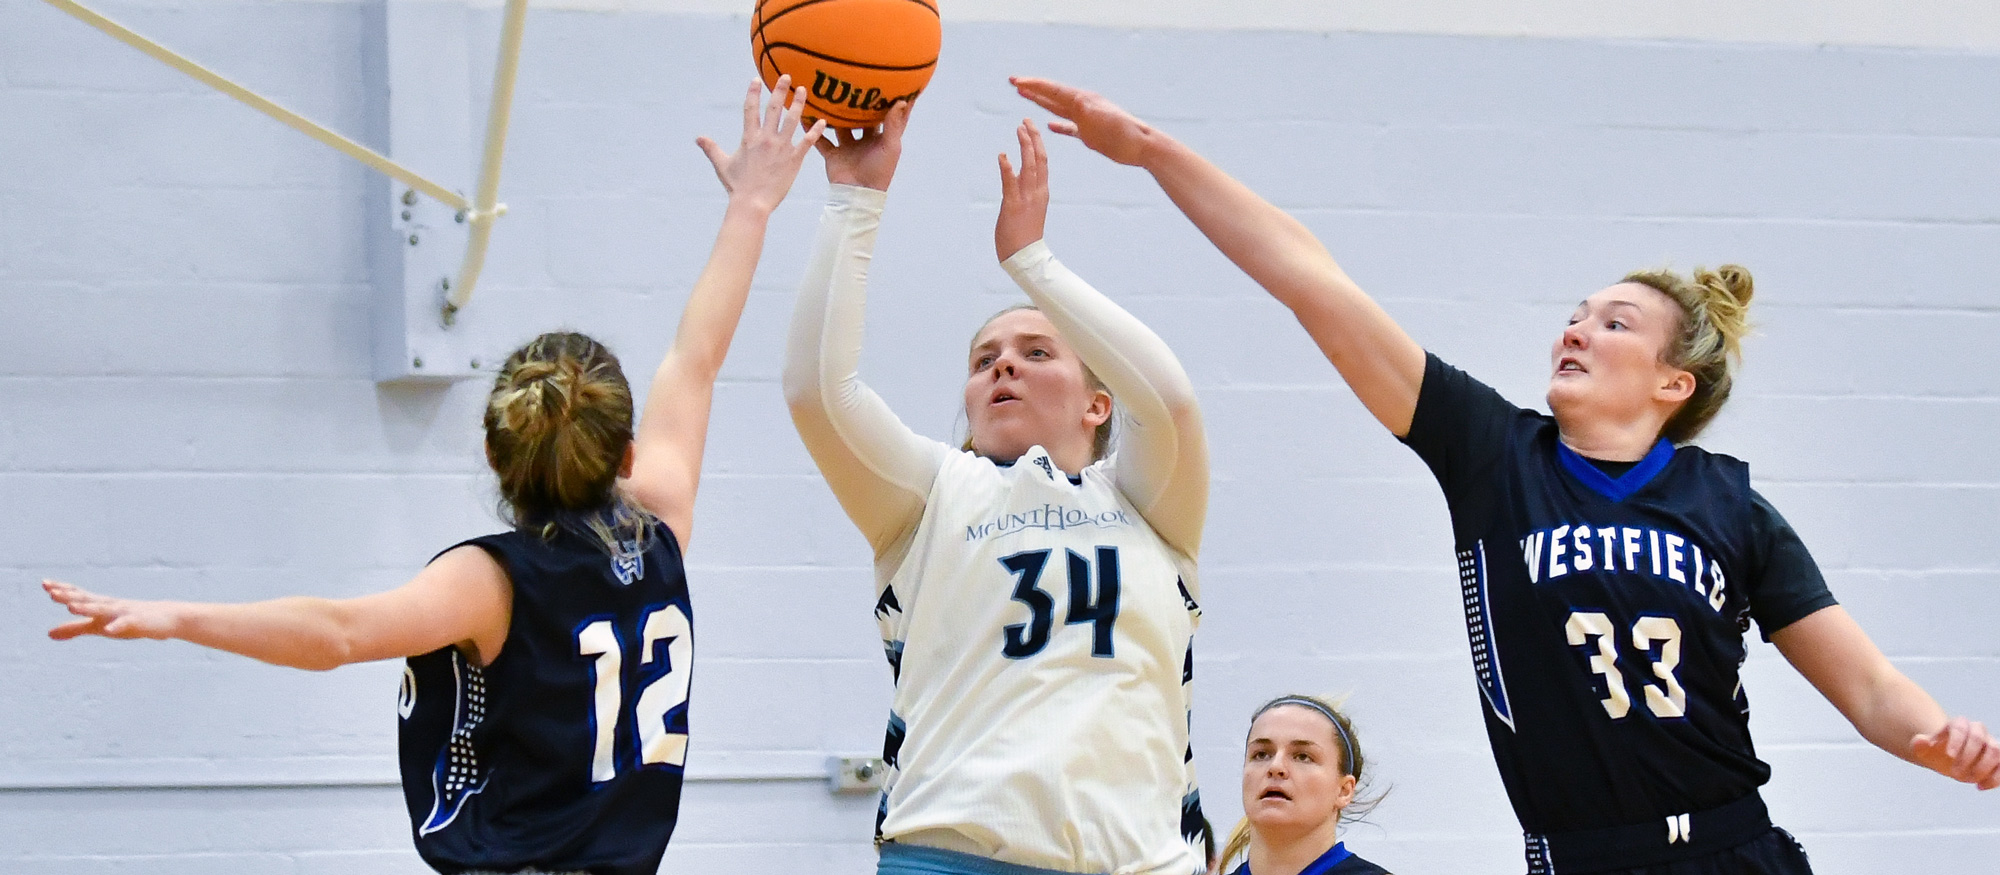 Cal McGonagle scored a career-high 23 points in Mount Holyoke's 64-52 loss at Lesley University on Nov. 30, 2022. (RJB Sports file photo)